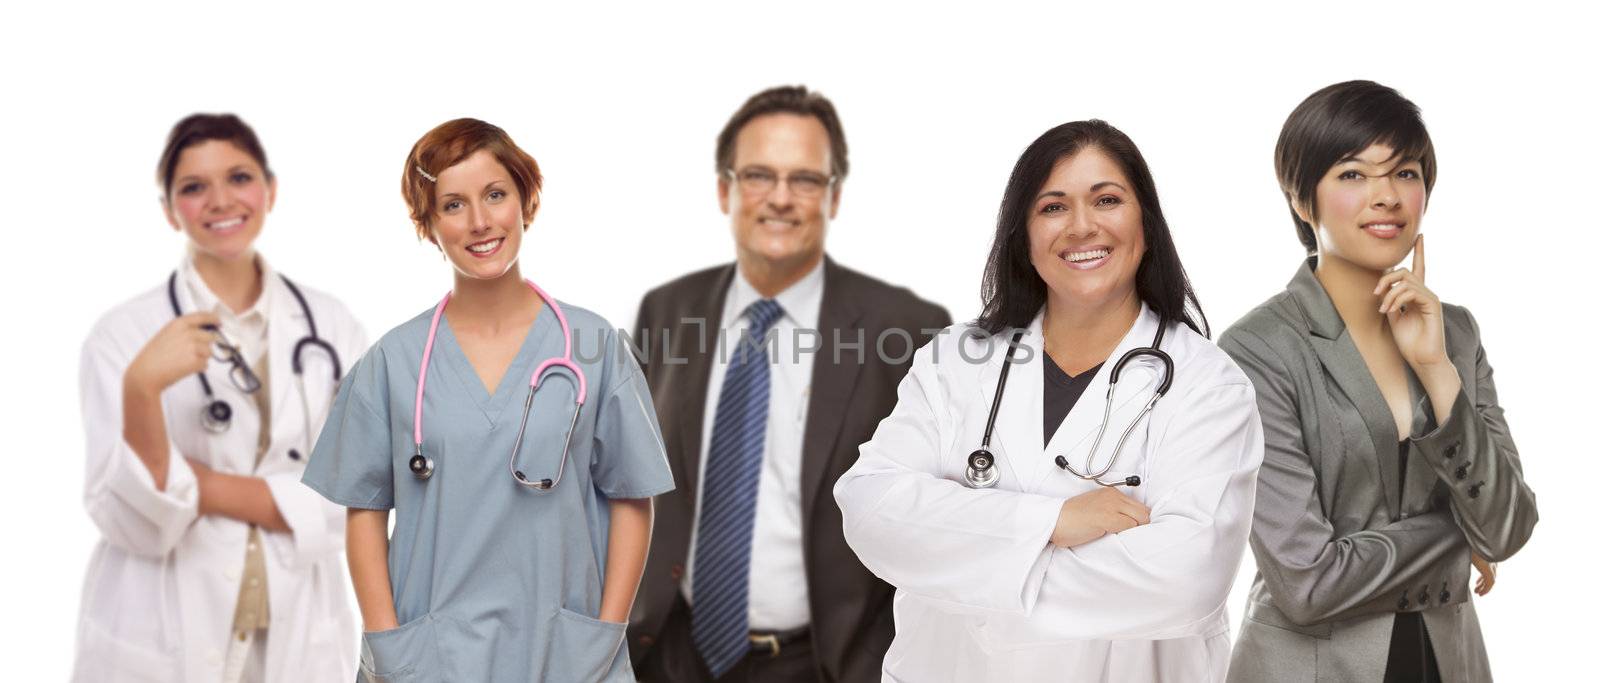 Group of Medical and Business People on White by Feverpitched